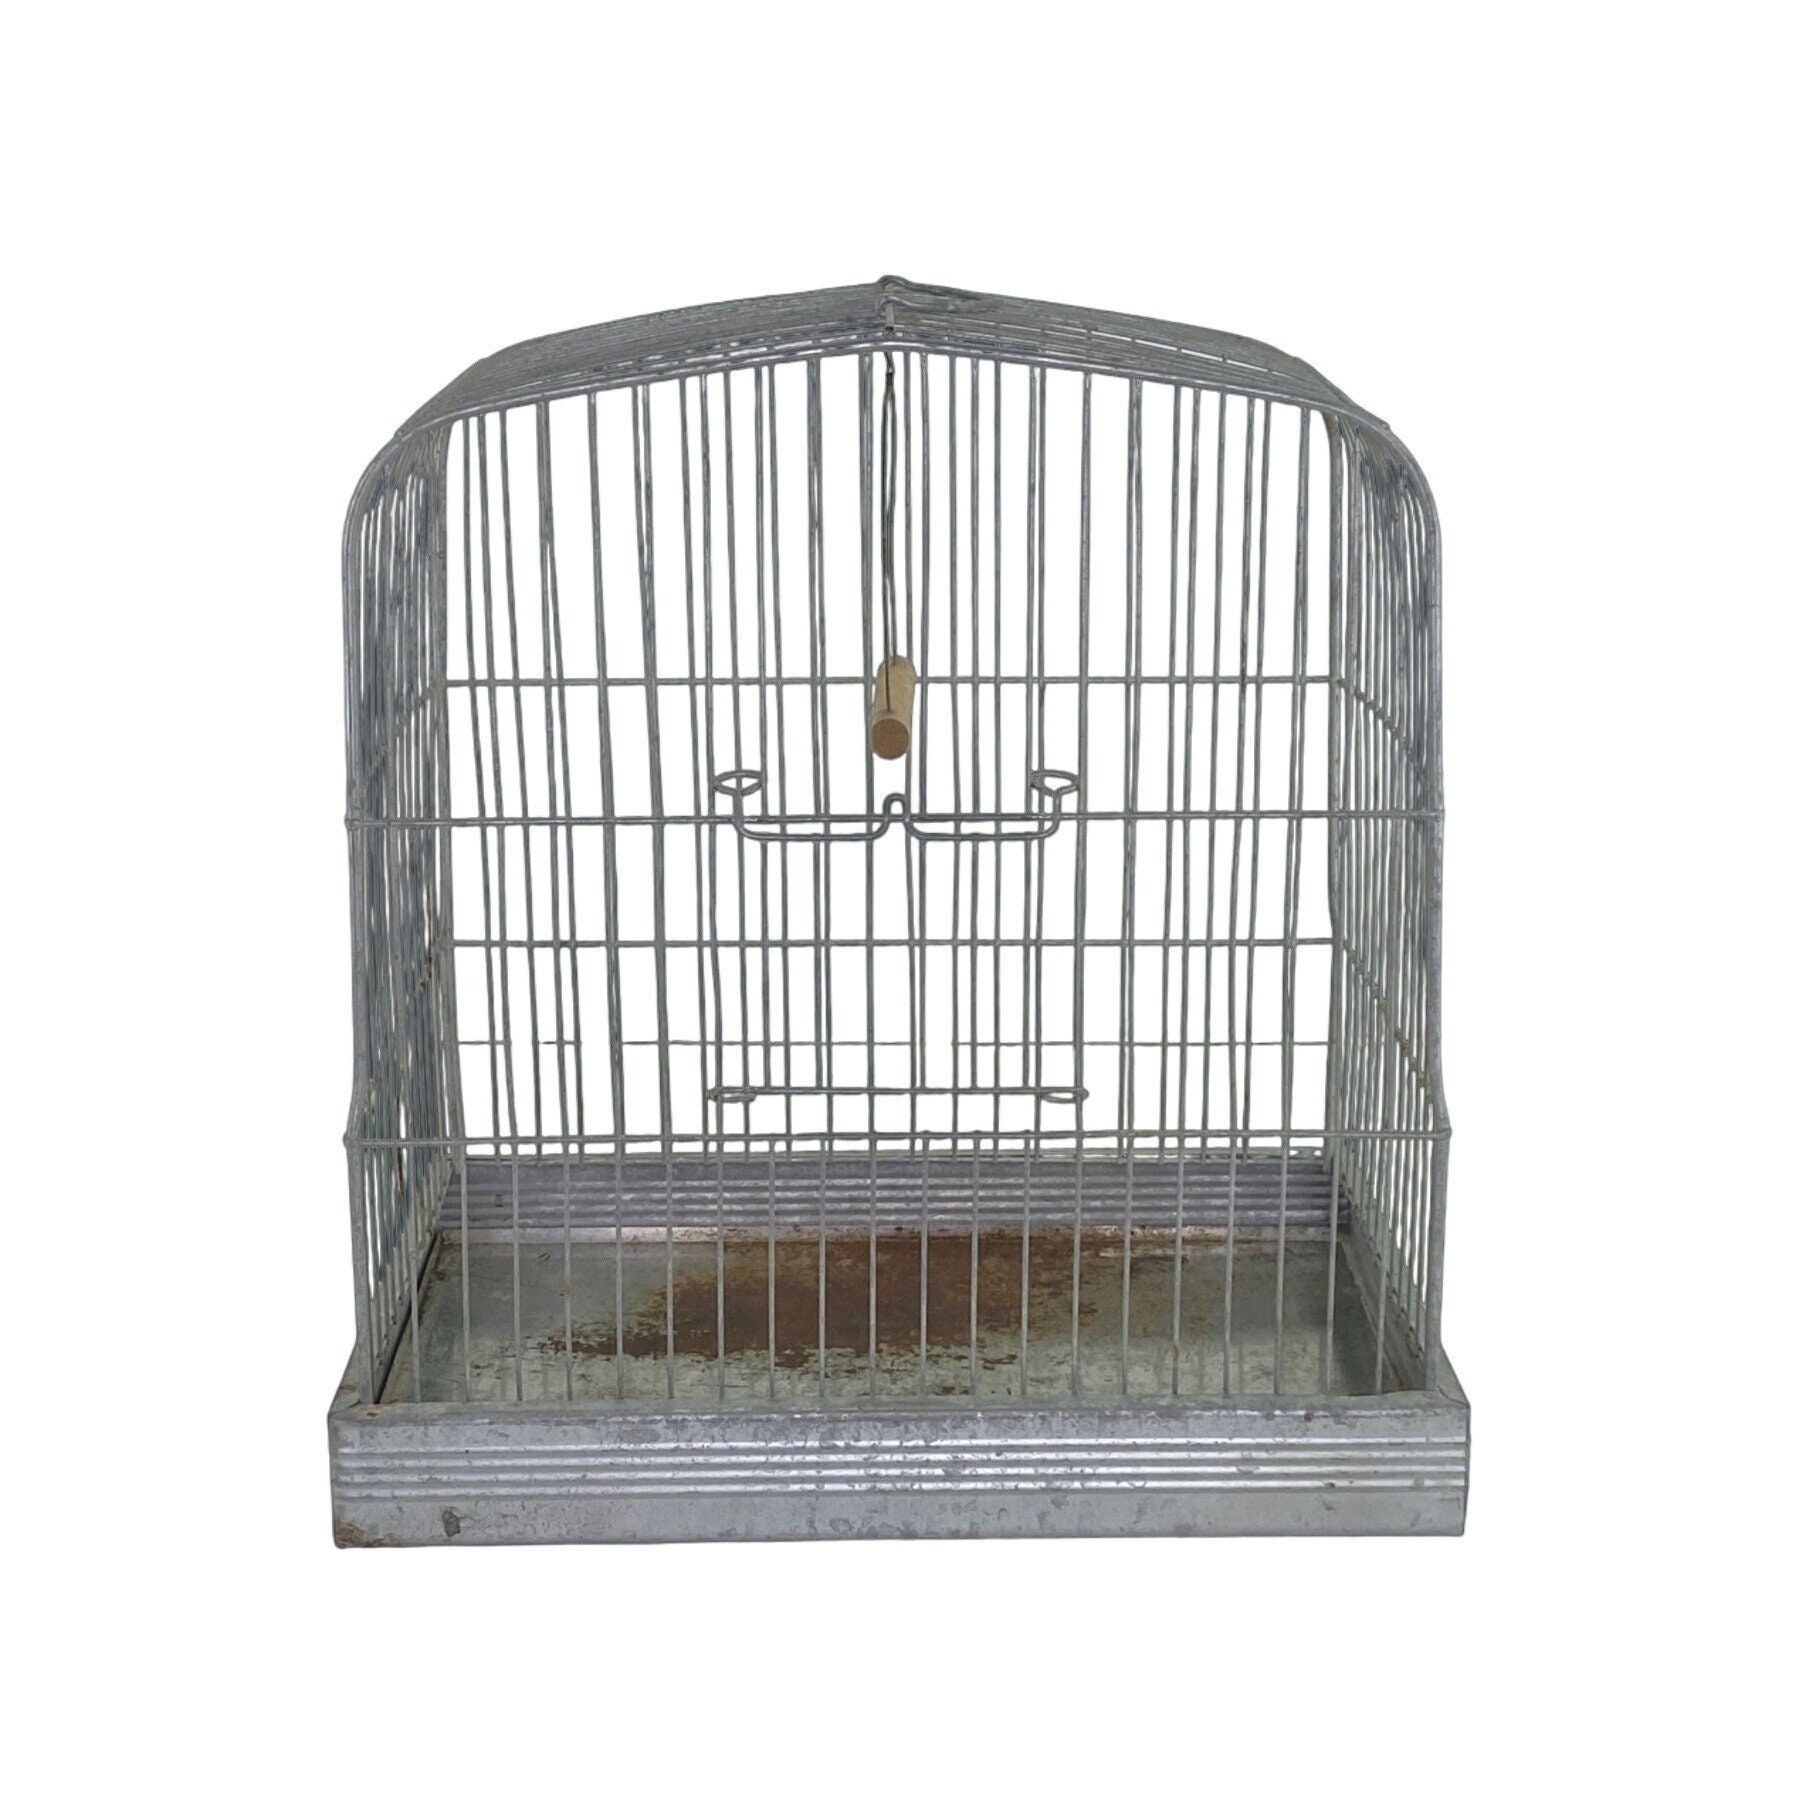 White 18-inch Medium Parakeet Wire Bird Cage for Budgie Parakeets